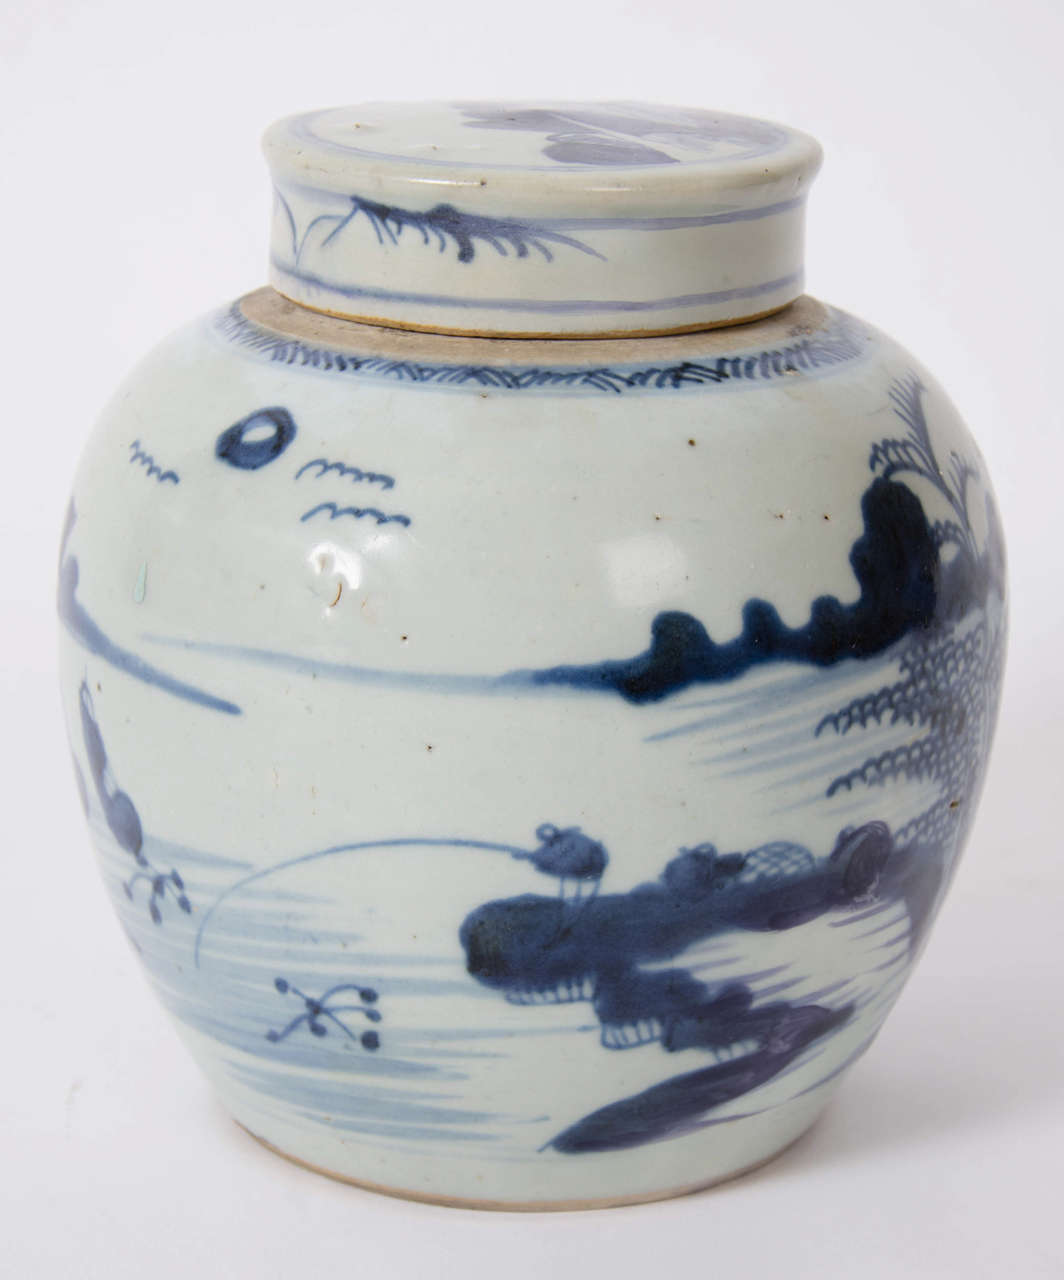 This is a heavy CHINESE porcelain Jar with lid

The jar is CANTON decorated with a cottages scene by the water also showing what looks like two fishing boats on the water with their nets. There is also a border pattern around the top of the jar